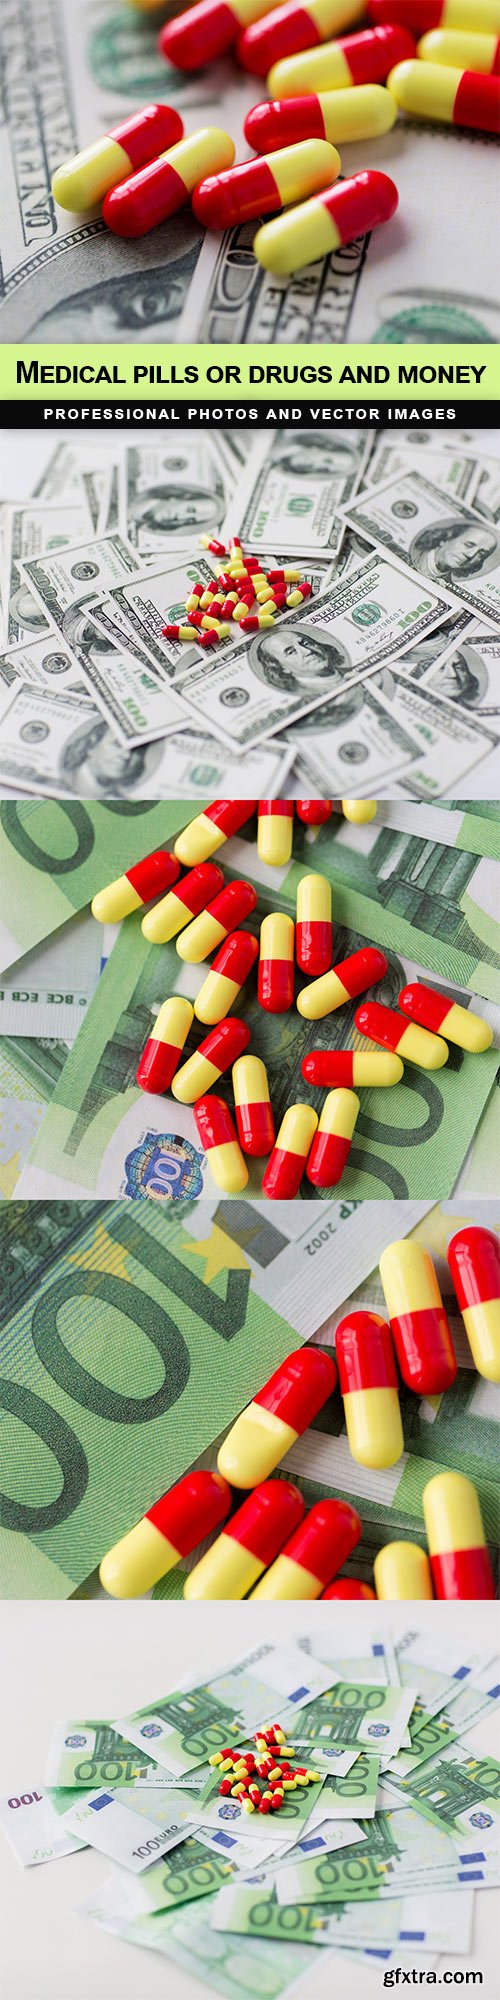 Medical pills or drugs and money - 5 UHQ JPEG